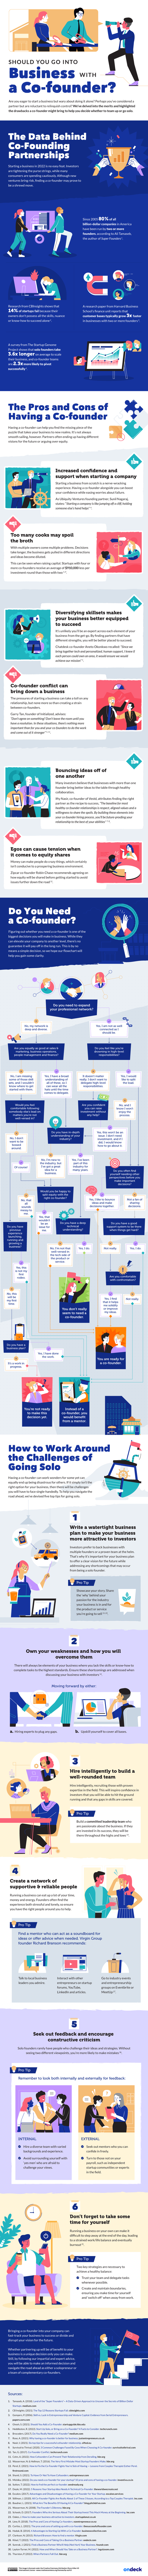 Should You Go Into Business With A Co-Founder Infographic